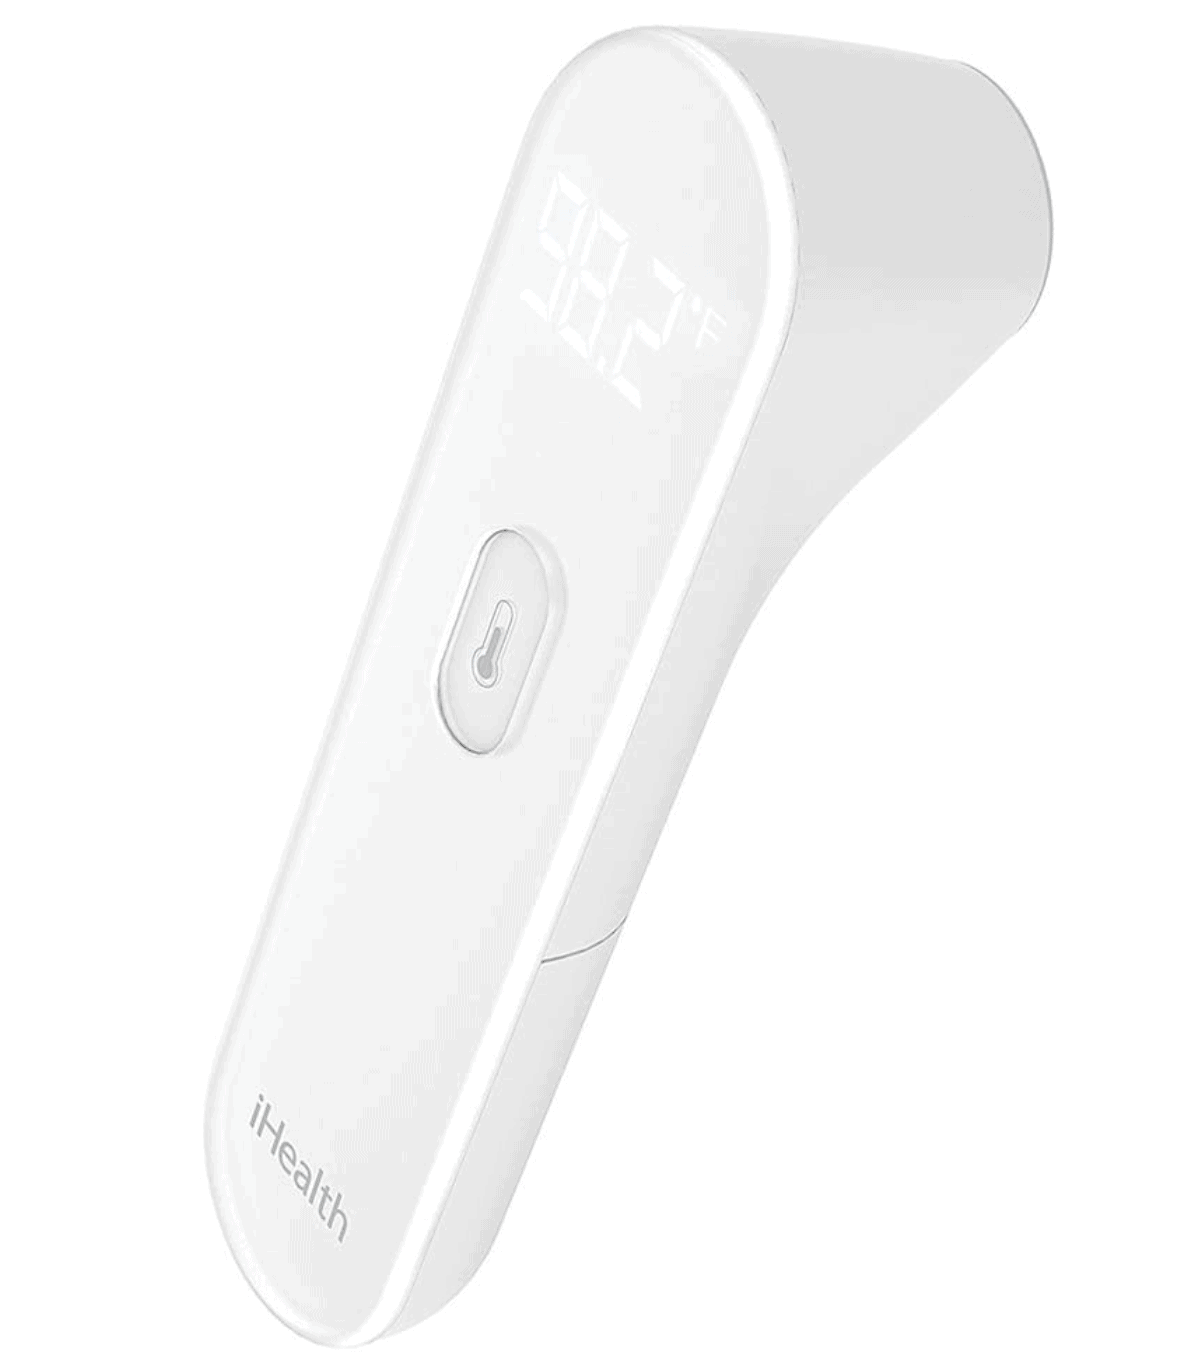 ihealth No Contact Thermometer